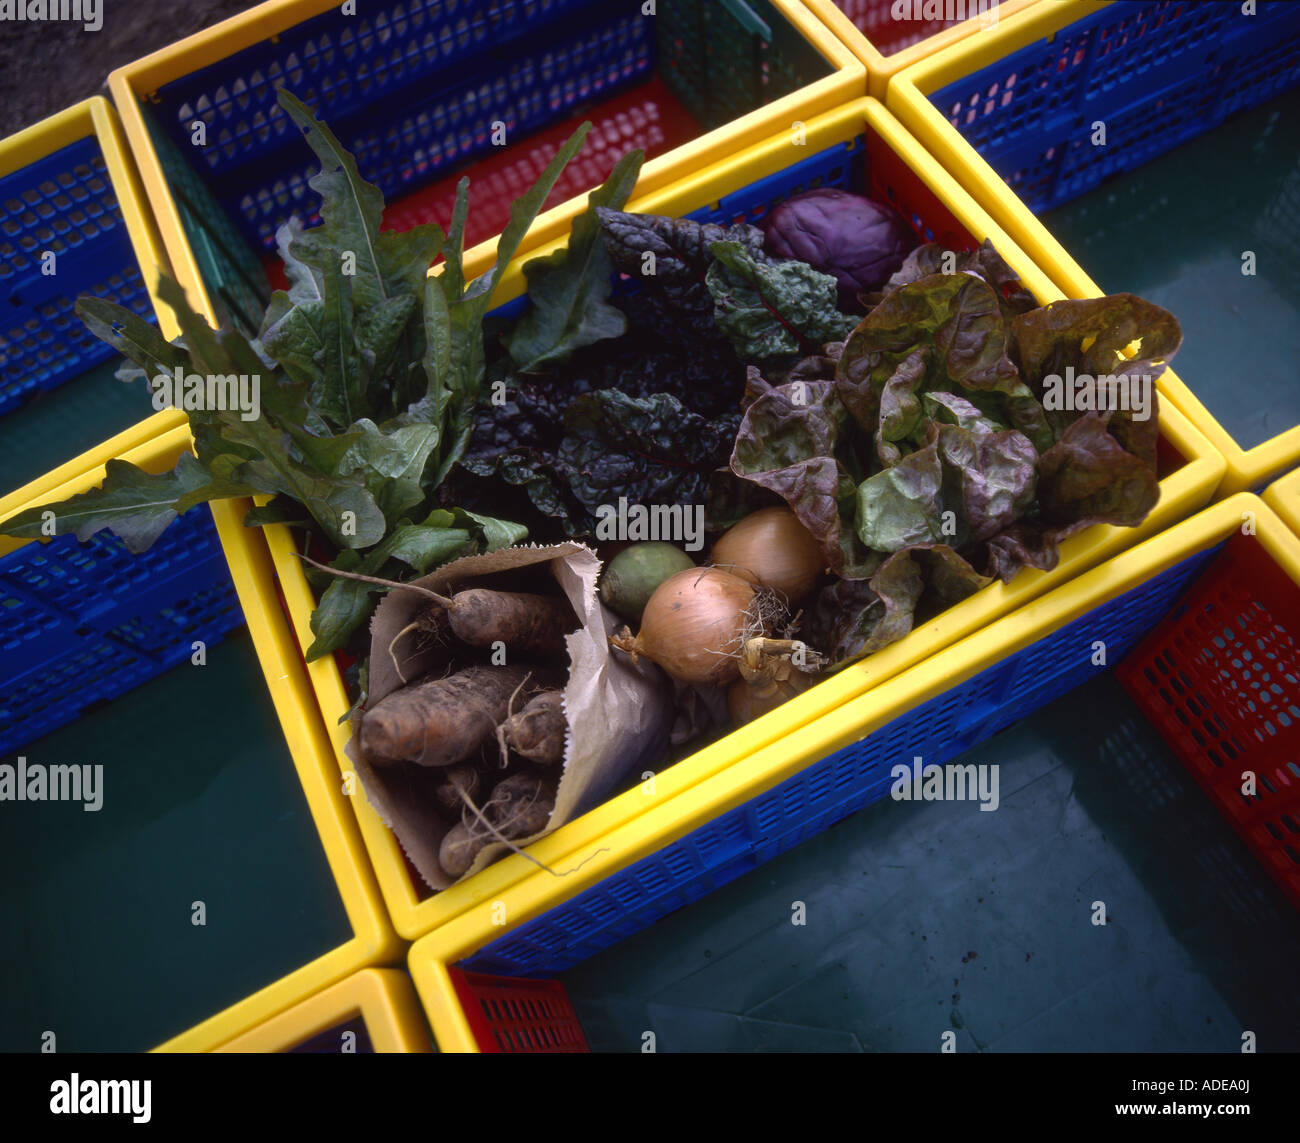 A BASKET OF ORGANIC VEGETABLES. Stock Photo